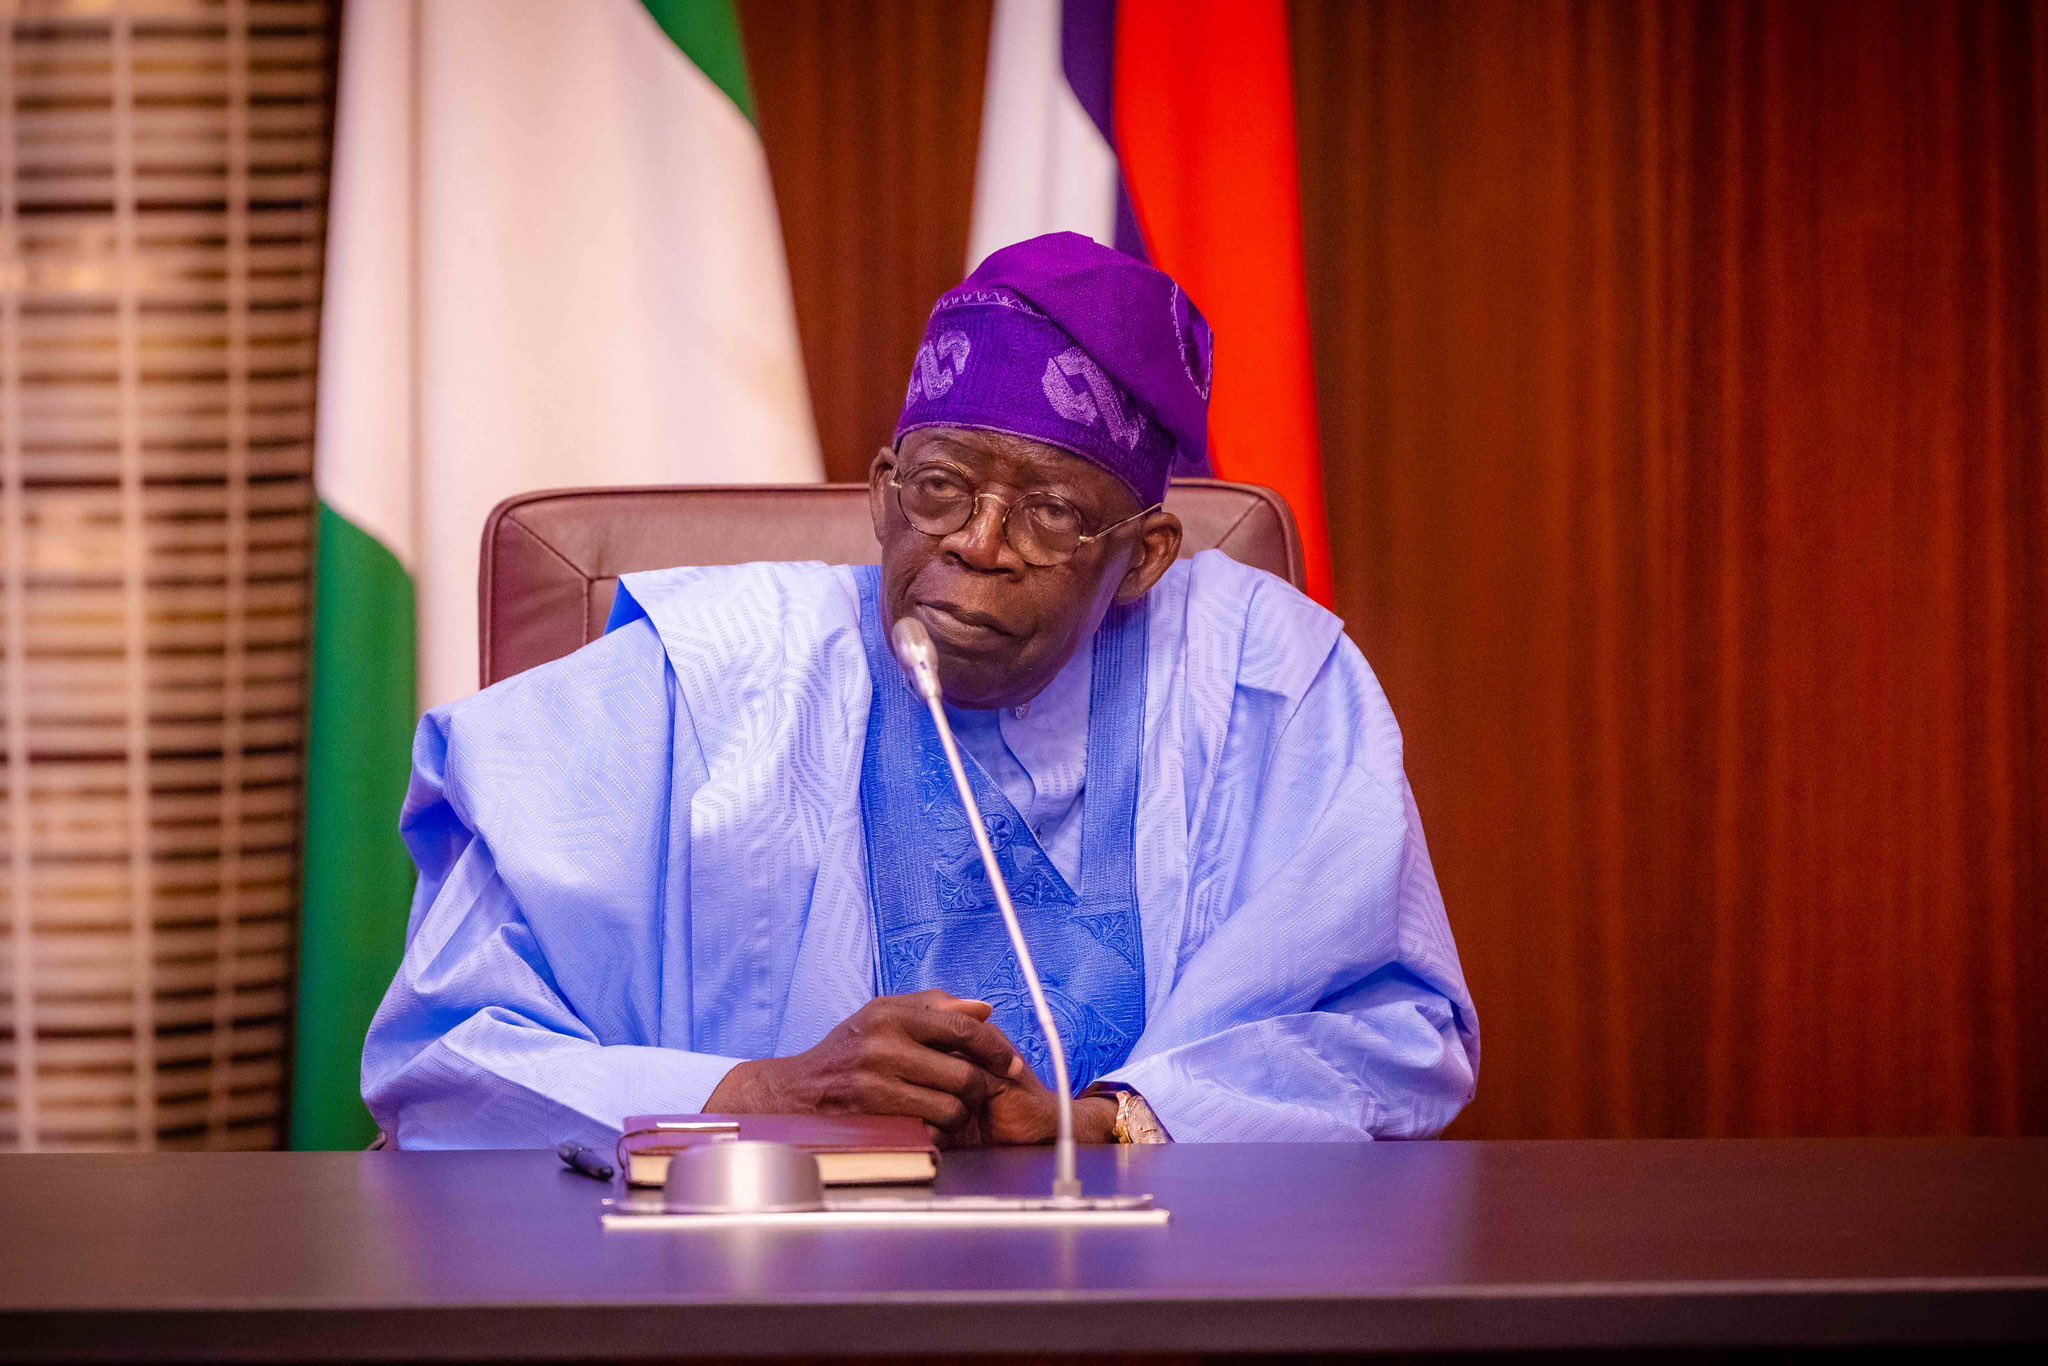 Grains allegedly yet to be released to Nigerians two weeks after President Tinubu